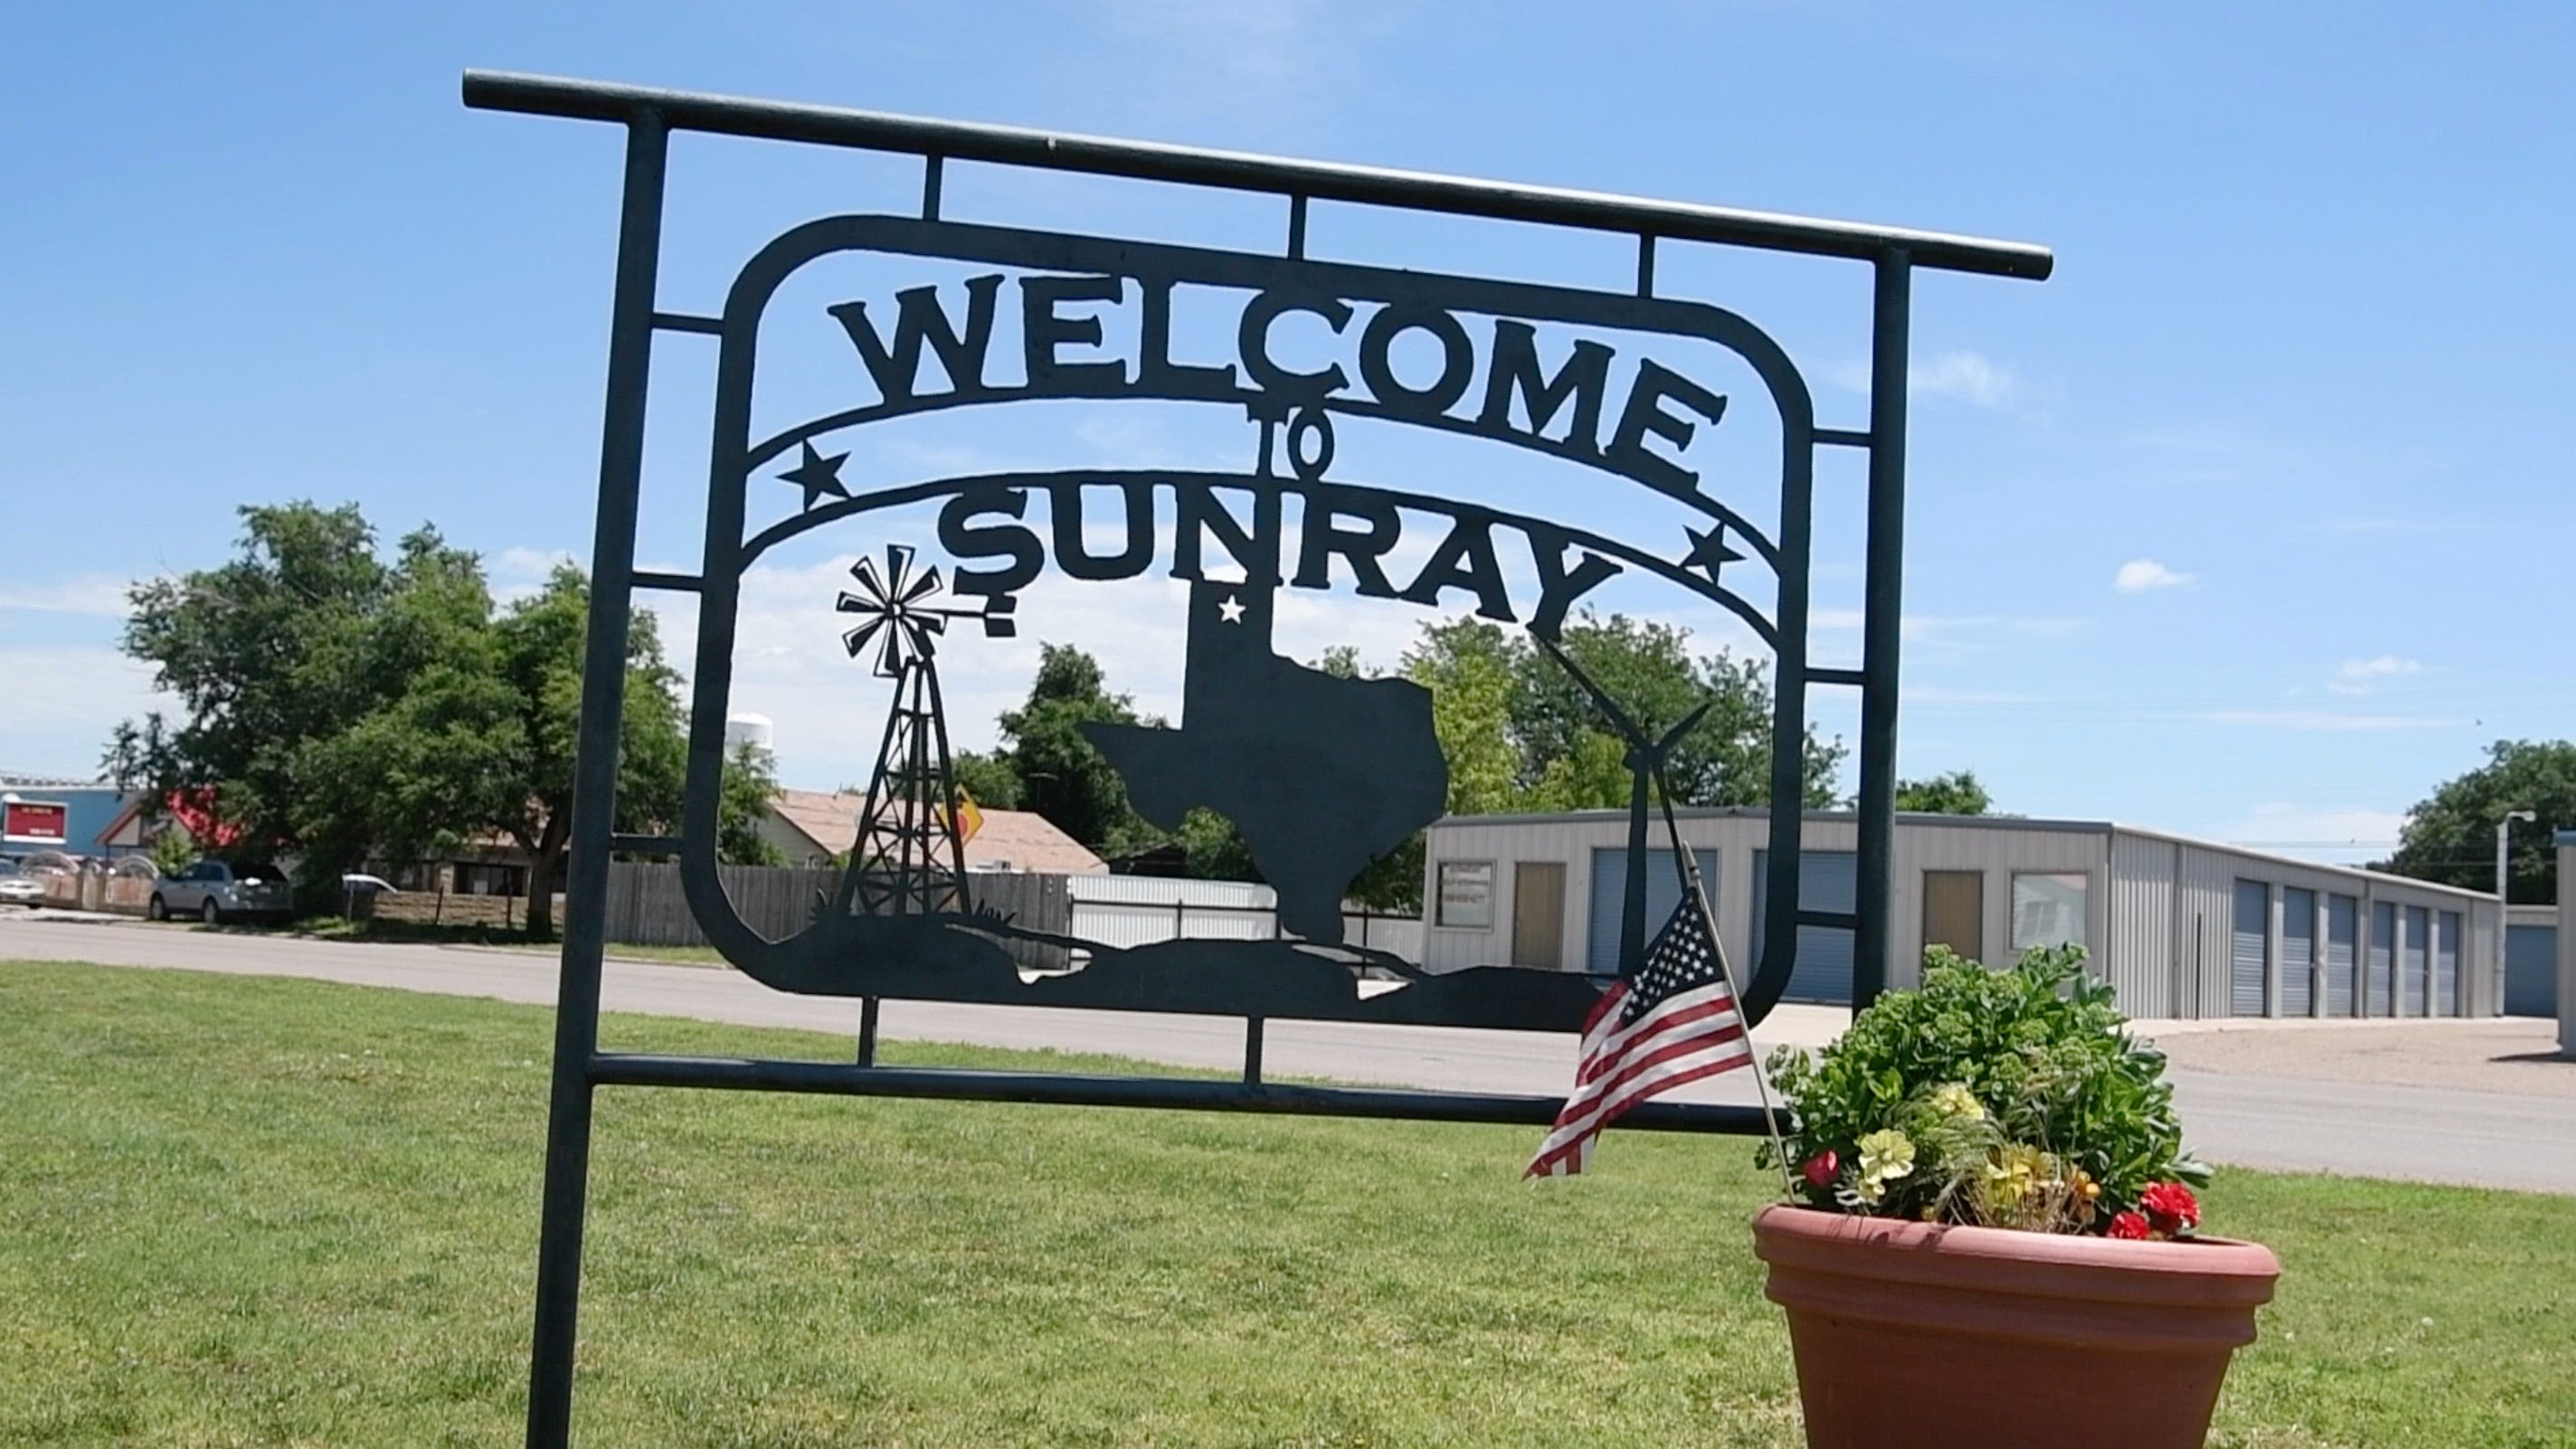  Sunray, TX: Where it is, what you need to know for Dateline NBC episode 